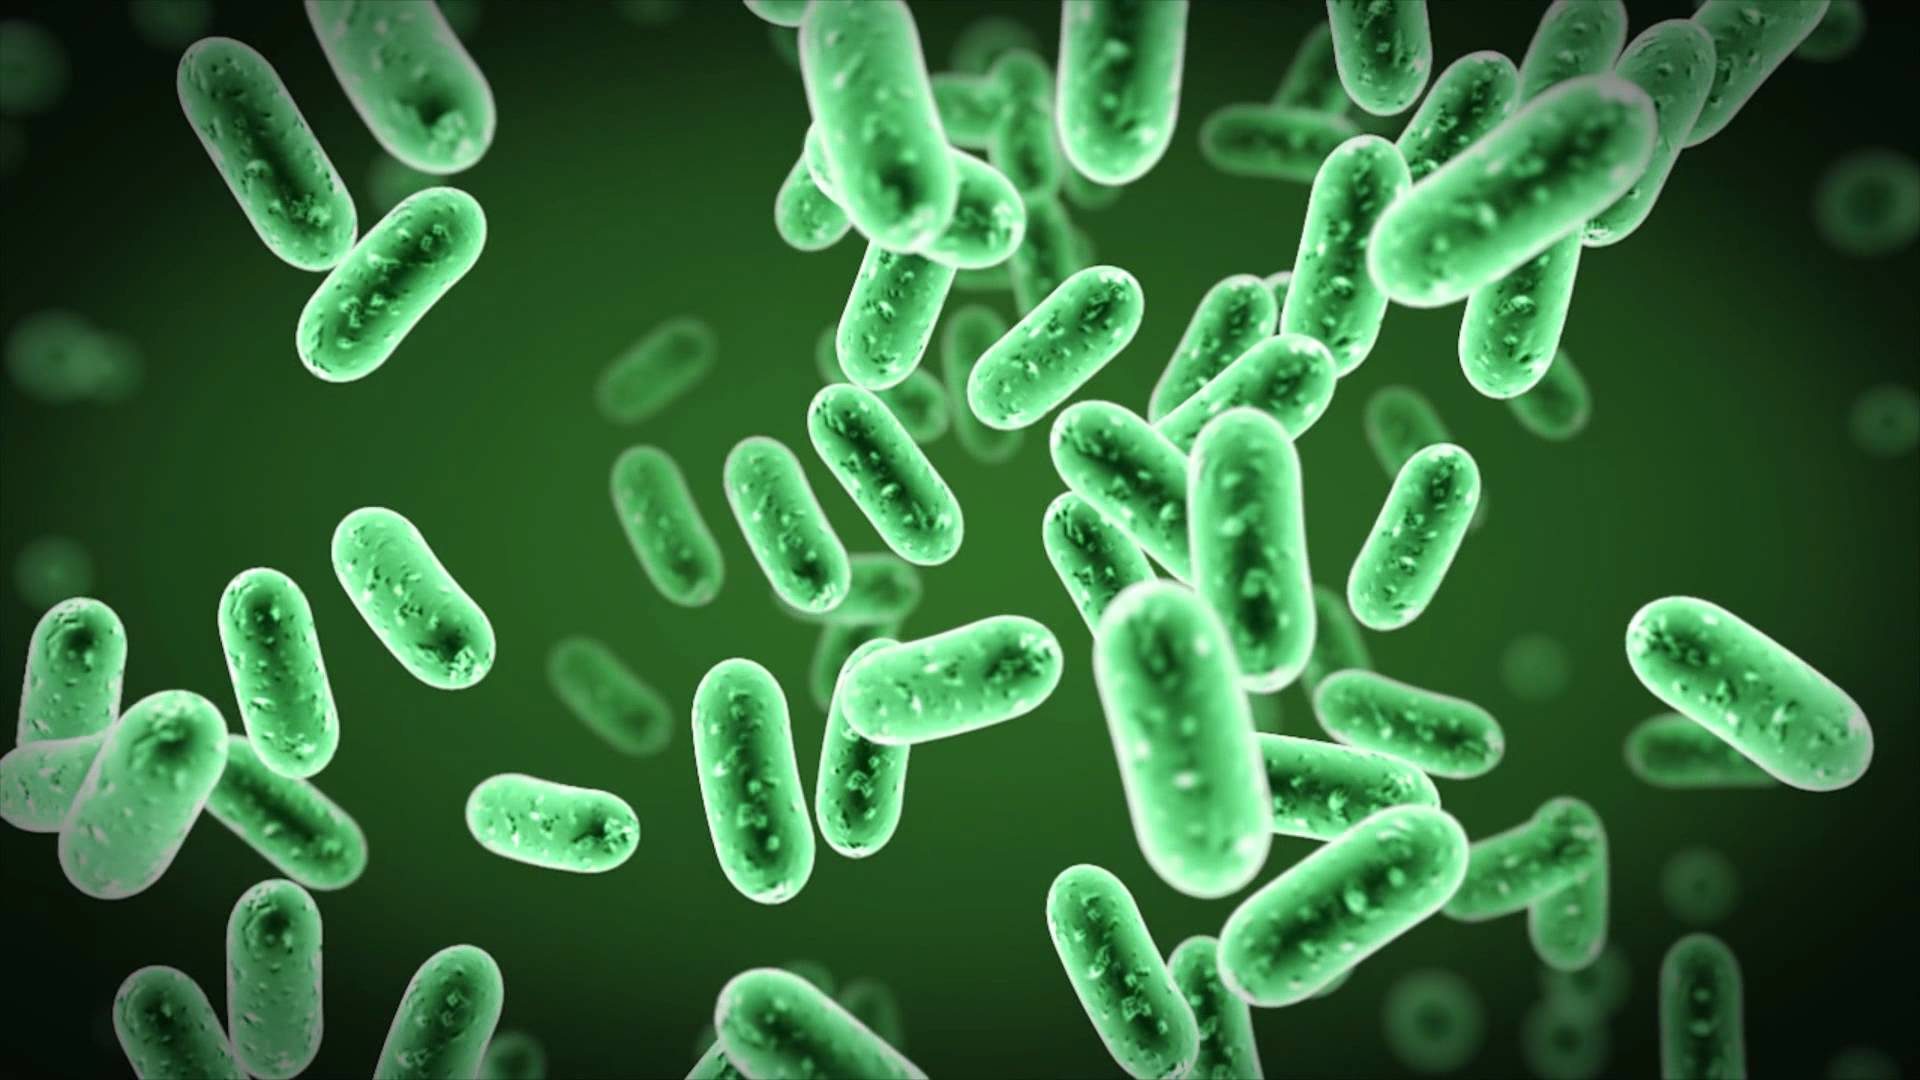 Bacteria Animation Wallpaper High Quality Background For Others